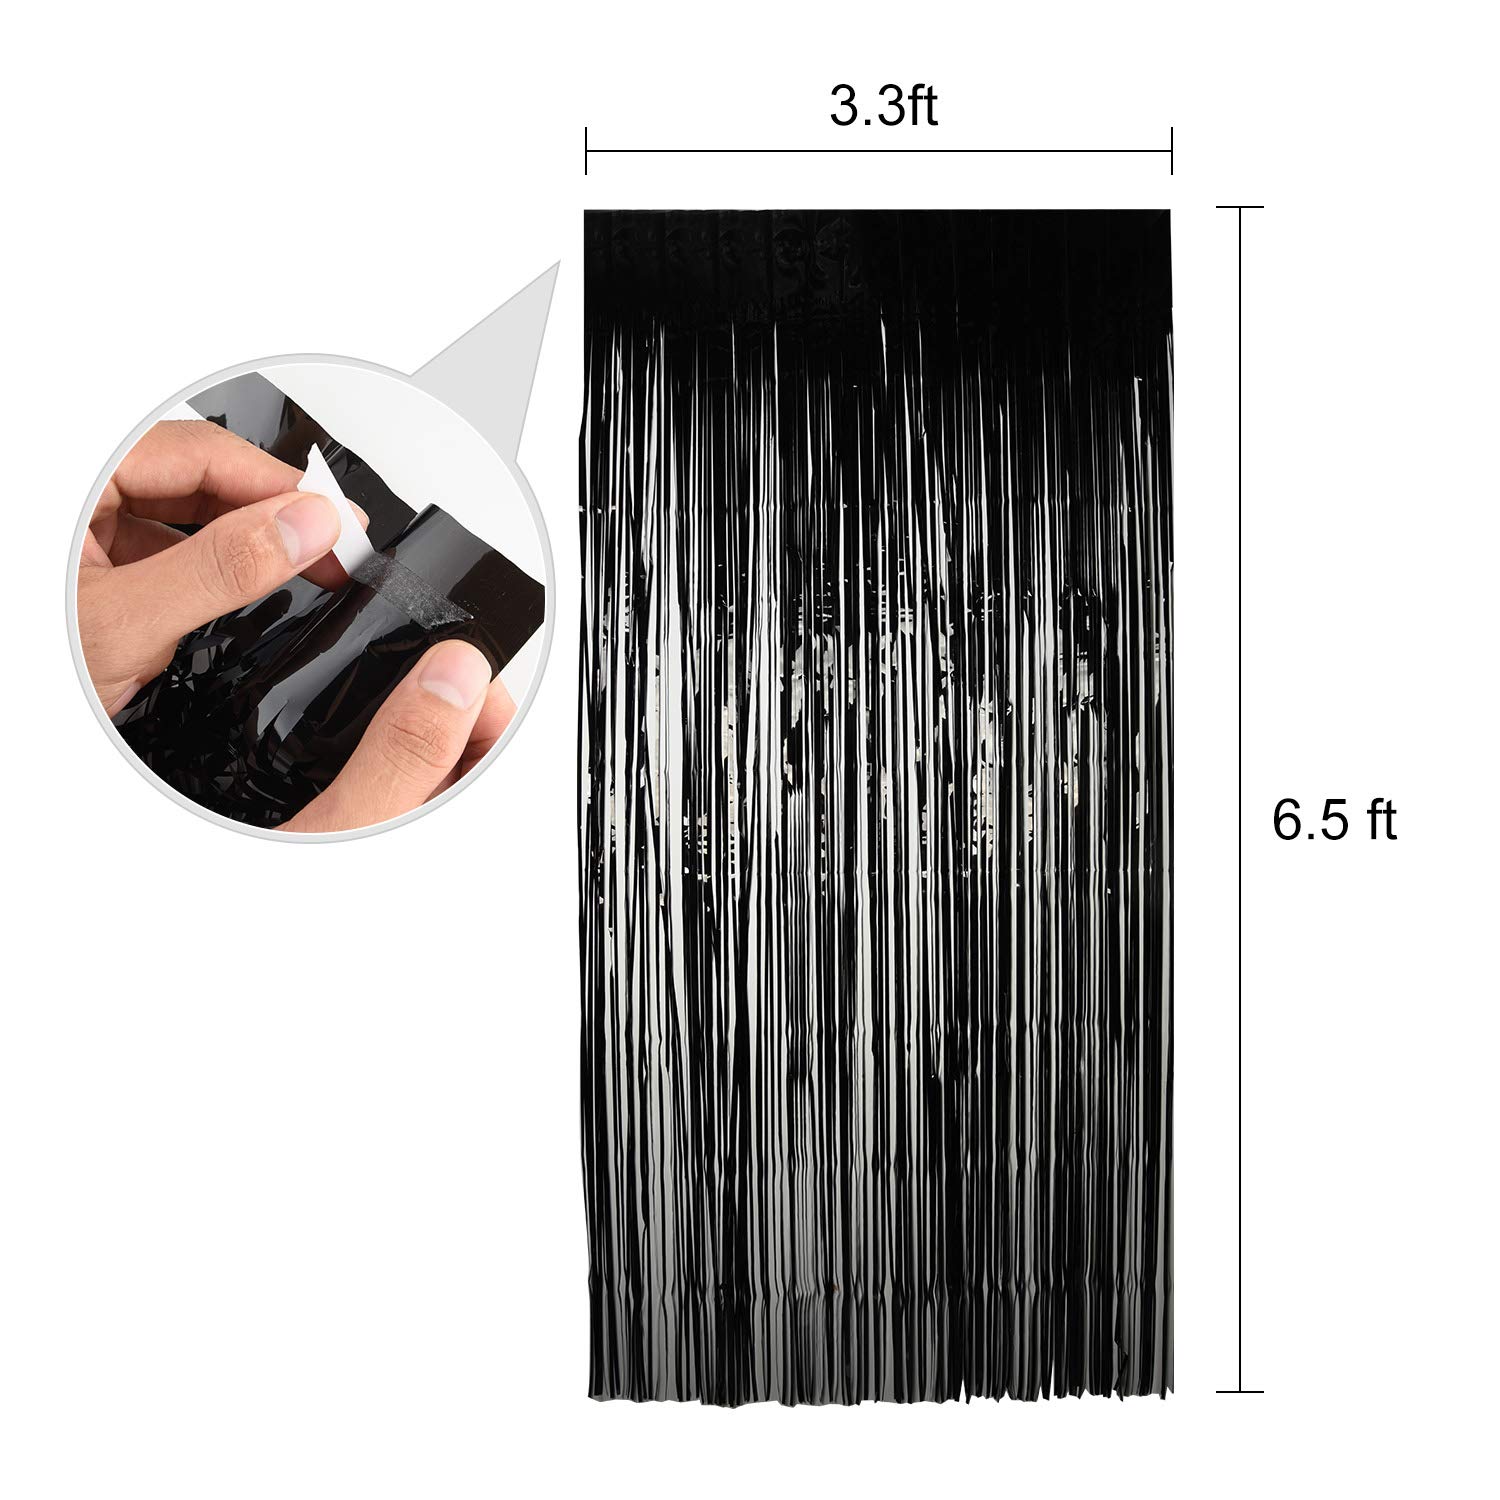 TUPARKA 3 Pcs Foil Curtains Photo Backdrop Props Shimmer Curtain for Halloween Haunted House Party Decorations (Black)